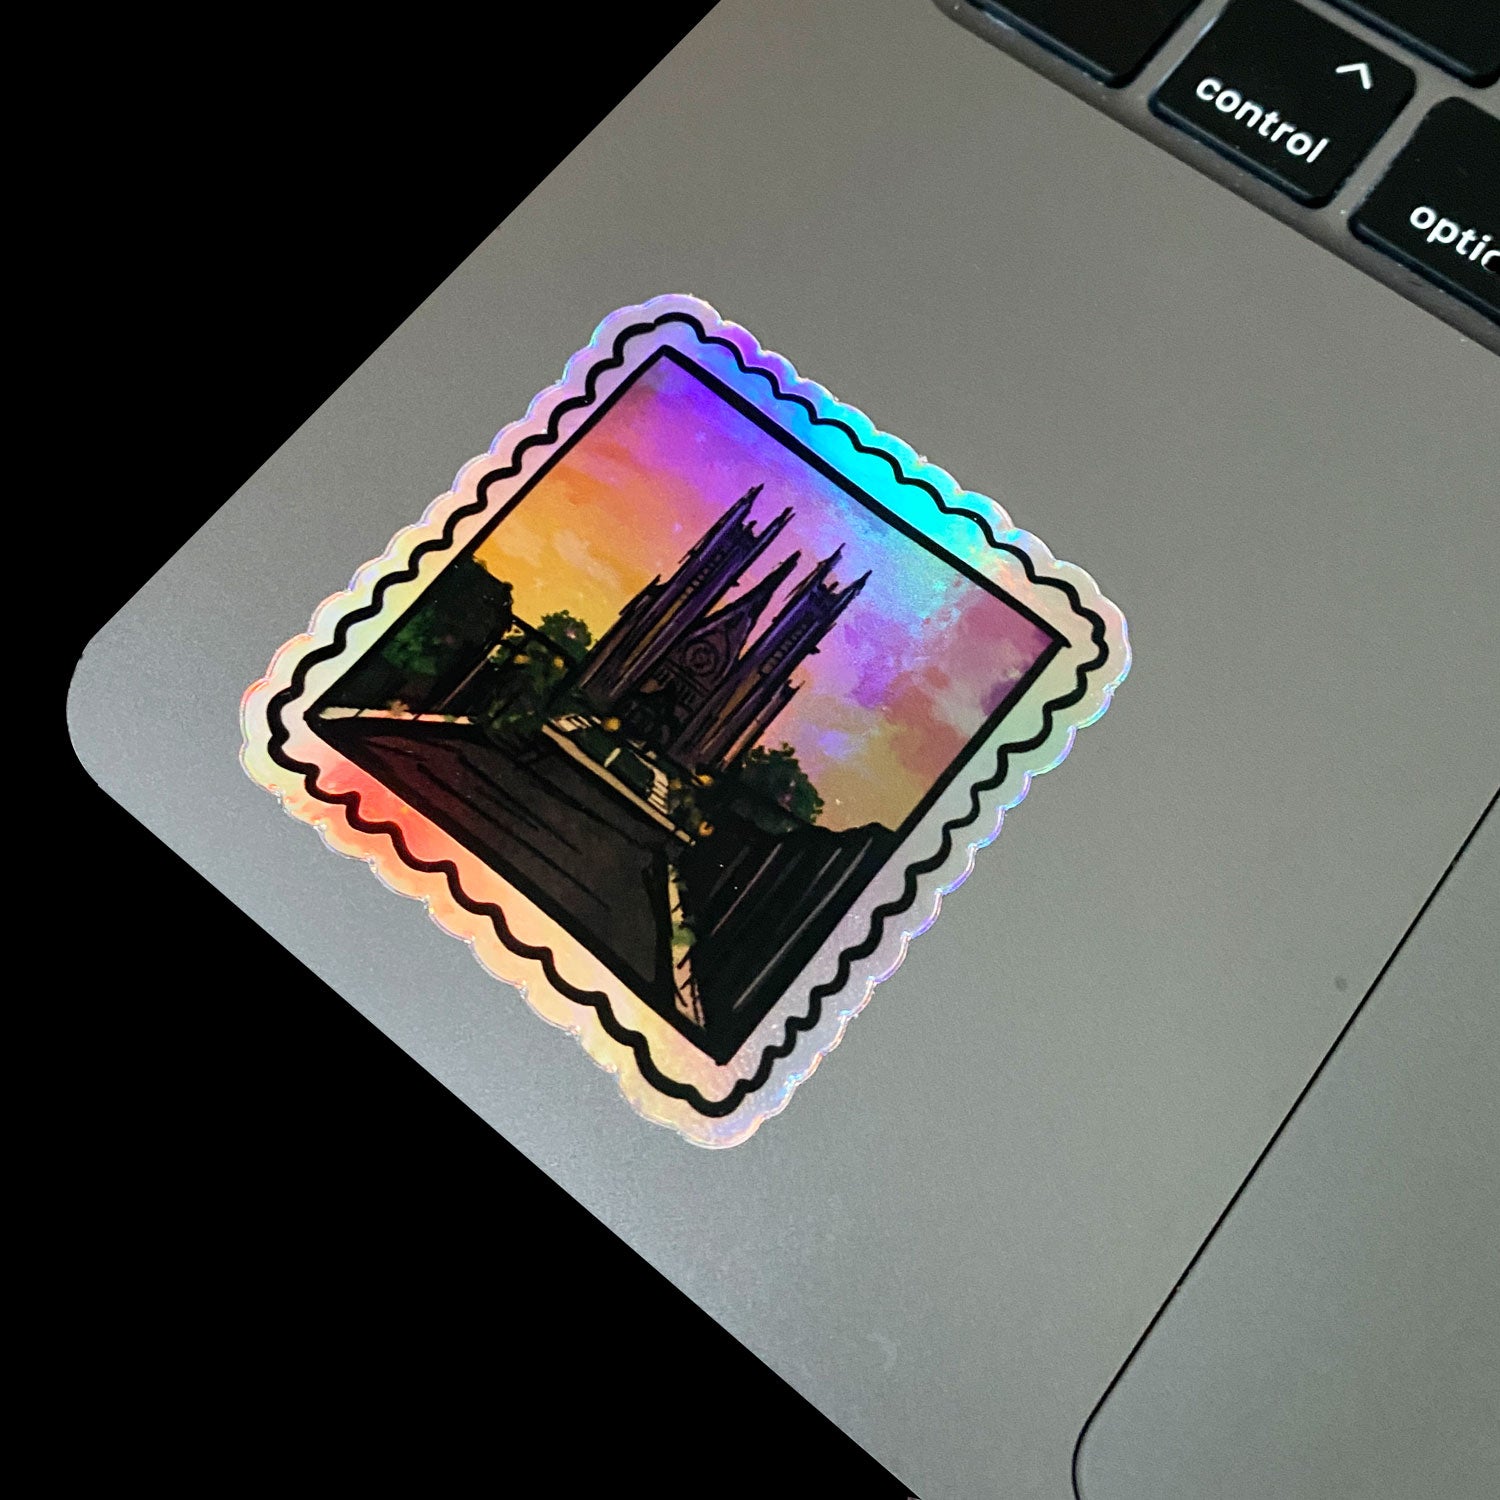 Guelph Basilica Holographic Sticker